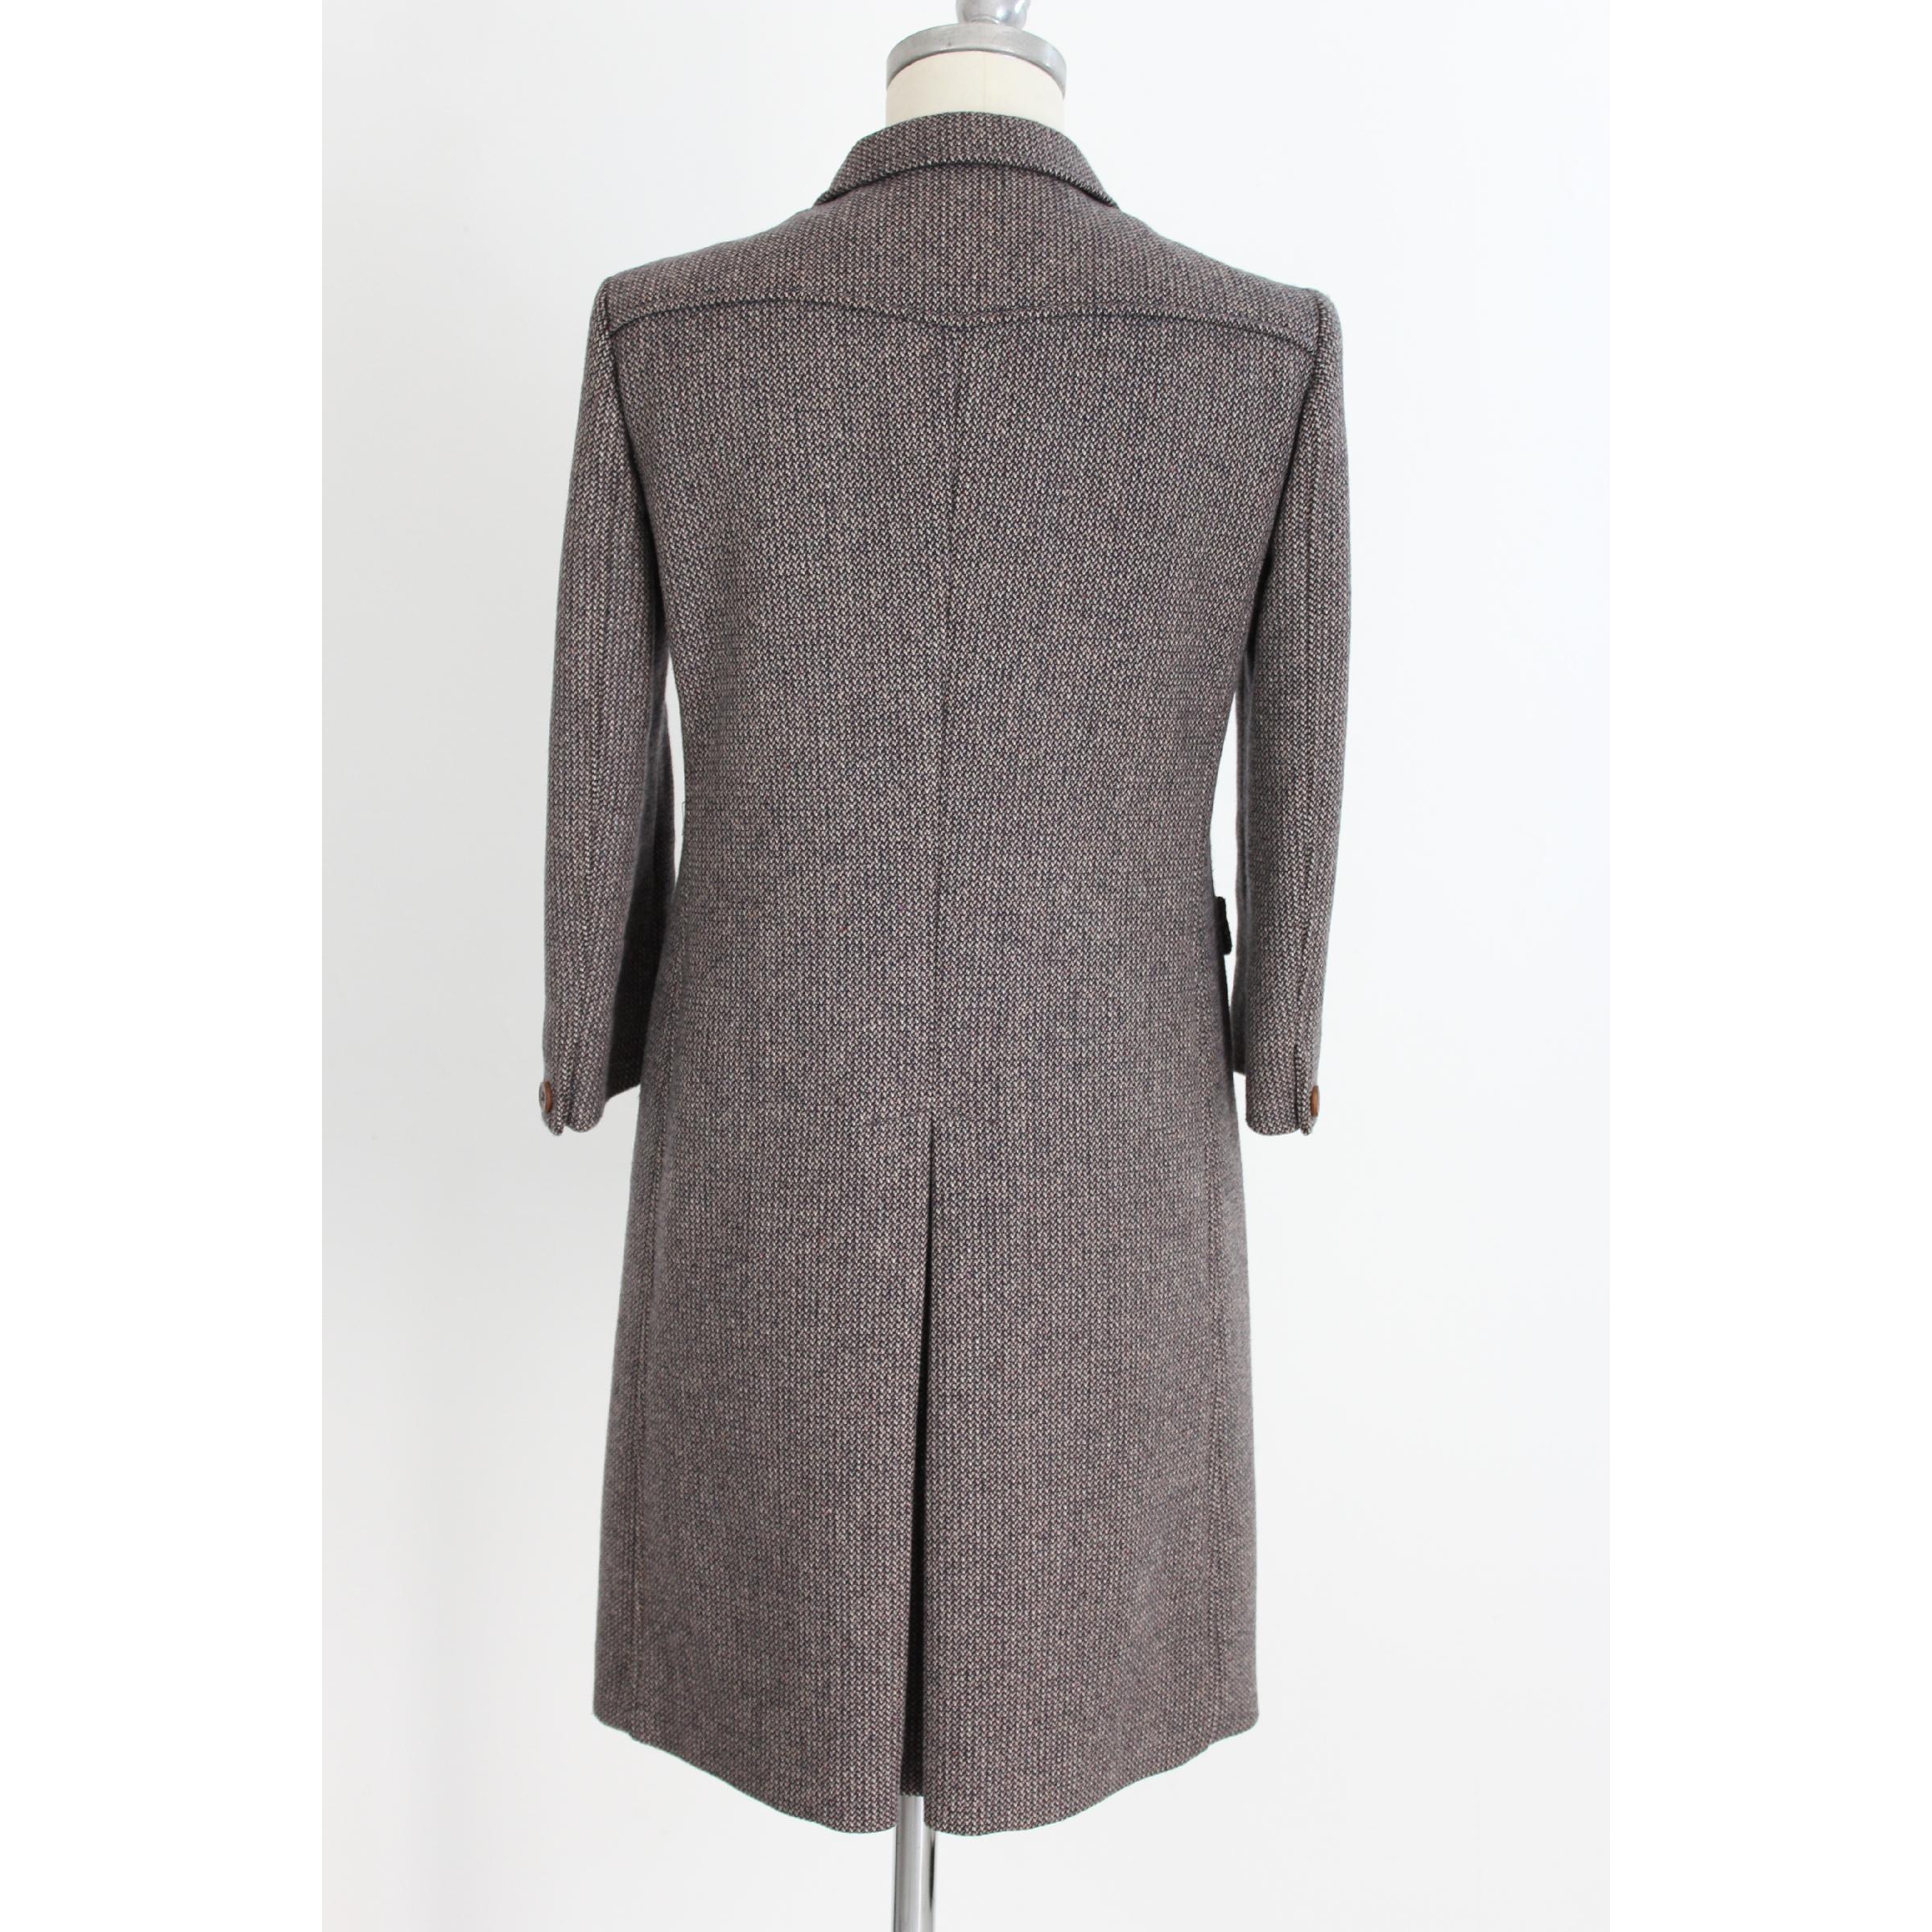 Miu Miu classic women's coat 2000s. Brown color in virgin wool, tweed fabric. There are two pockets on the sides, the sleeves are 3/4. All buttons are brown in 100% leather. Made in Italy. Excellent vintage conditions.

Size 40 It 6 Us 8